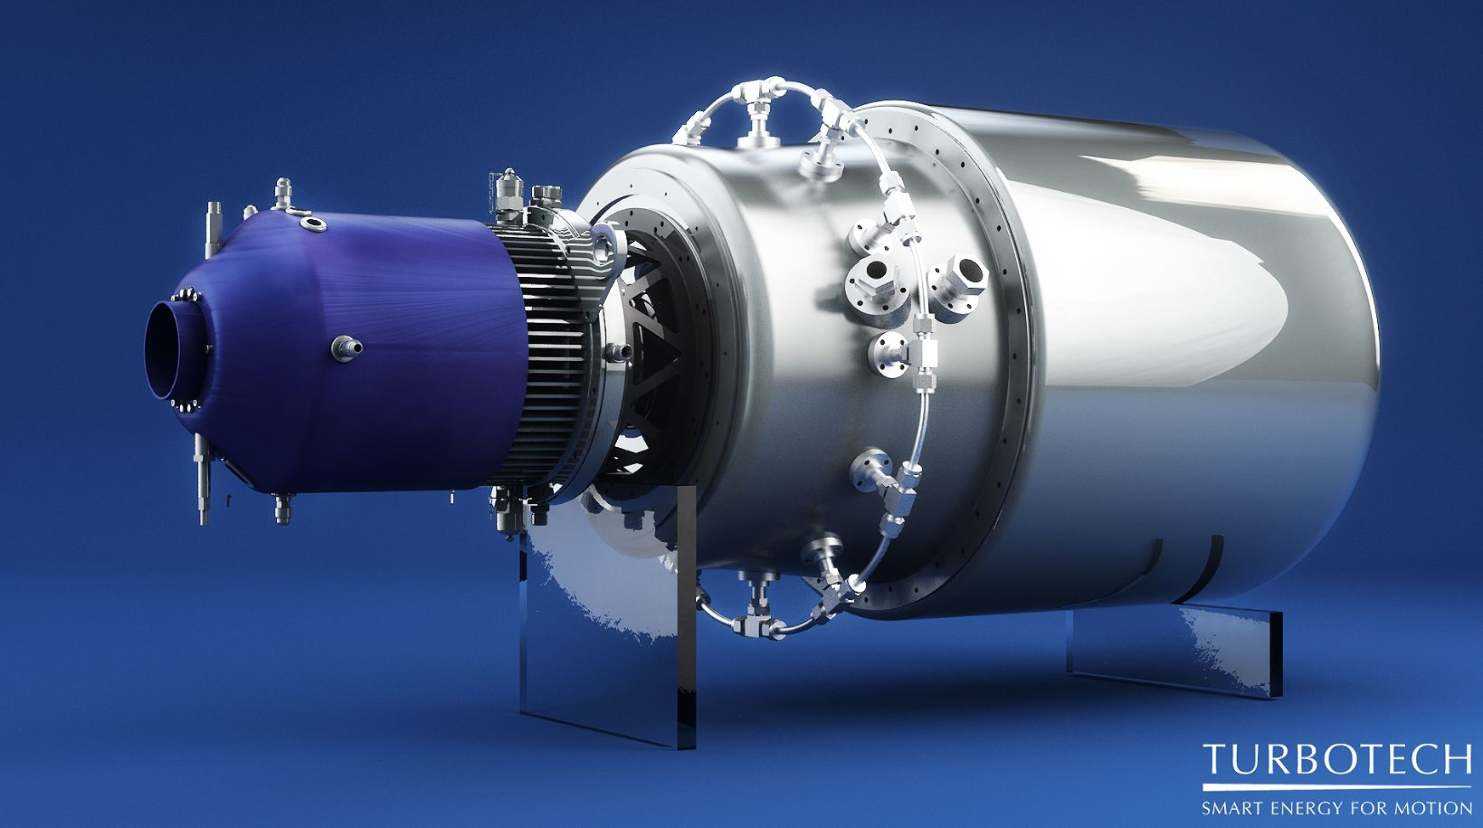 Safran invests in Turbotech